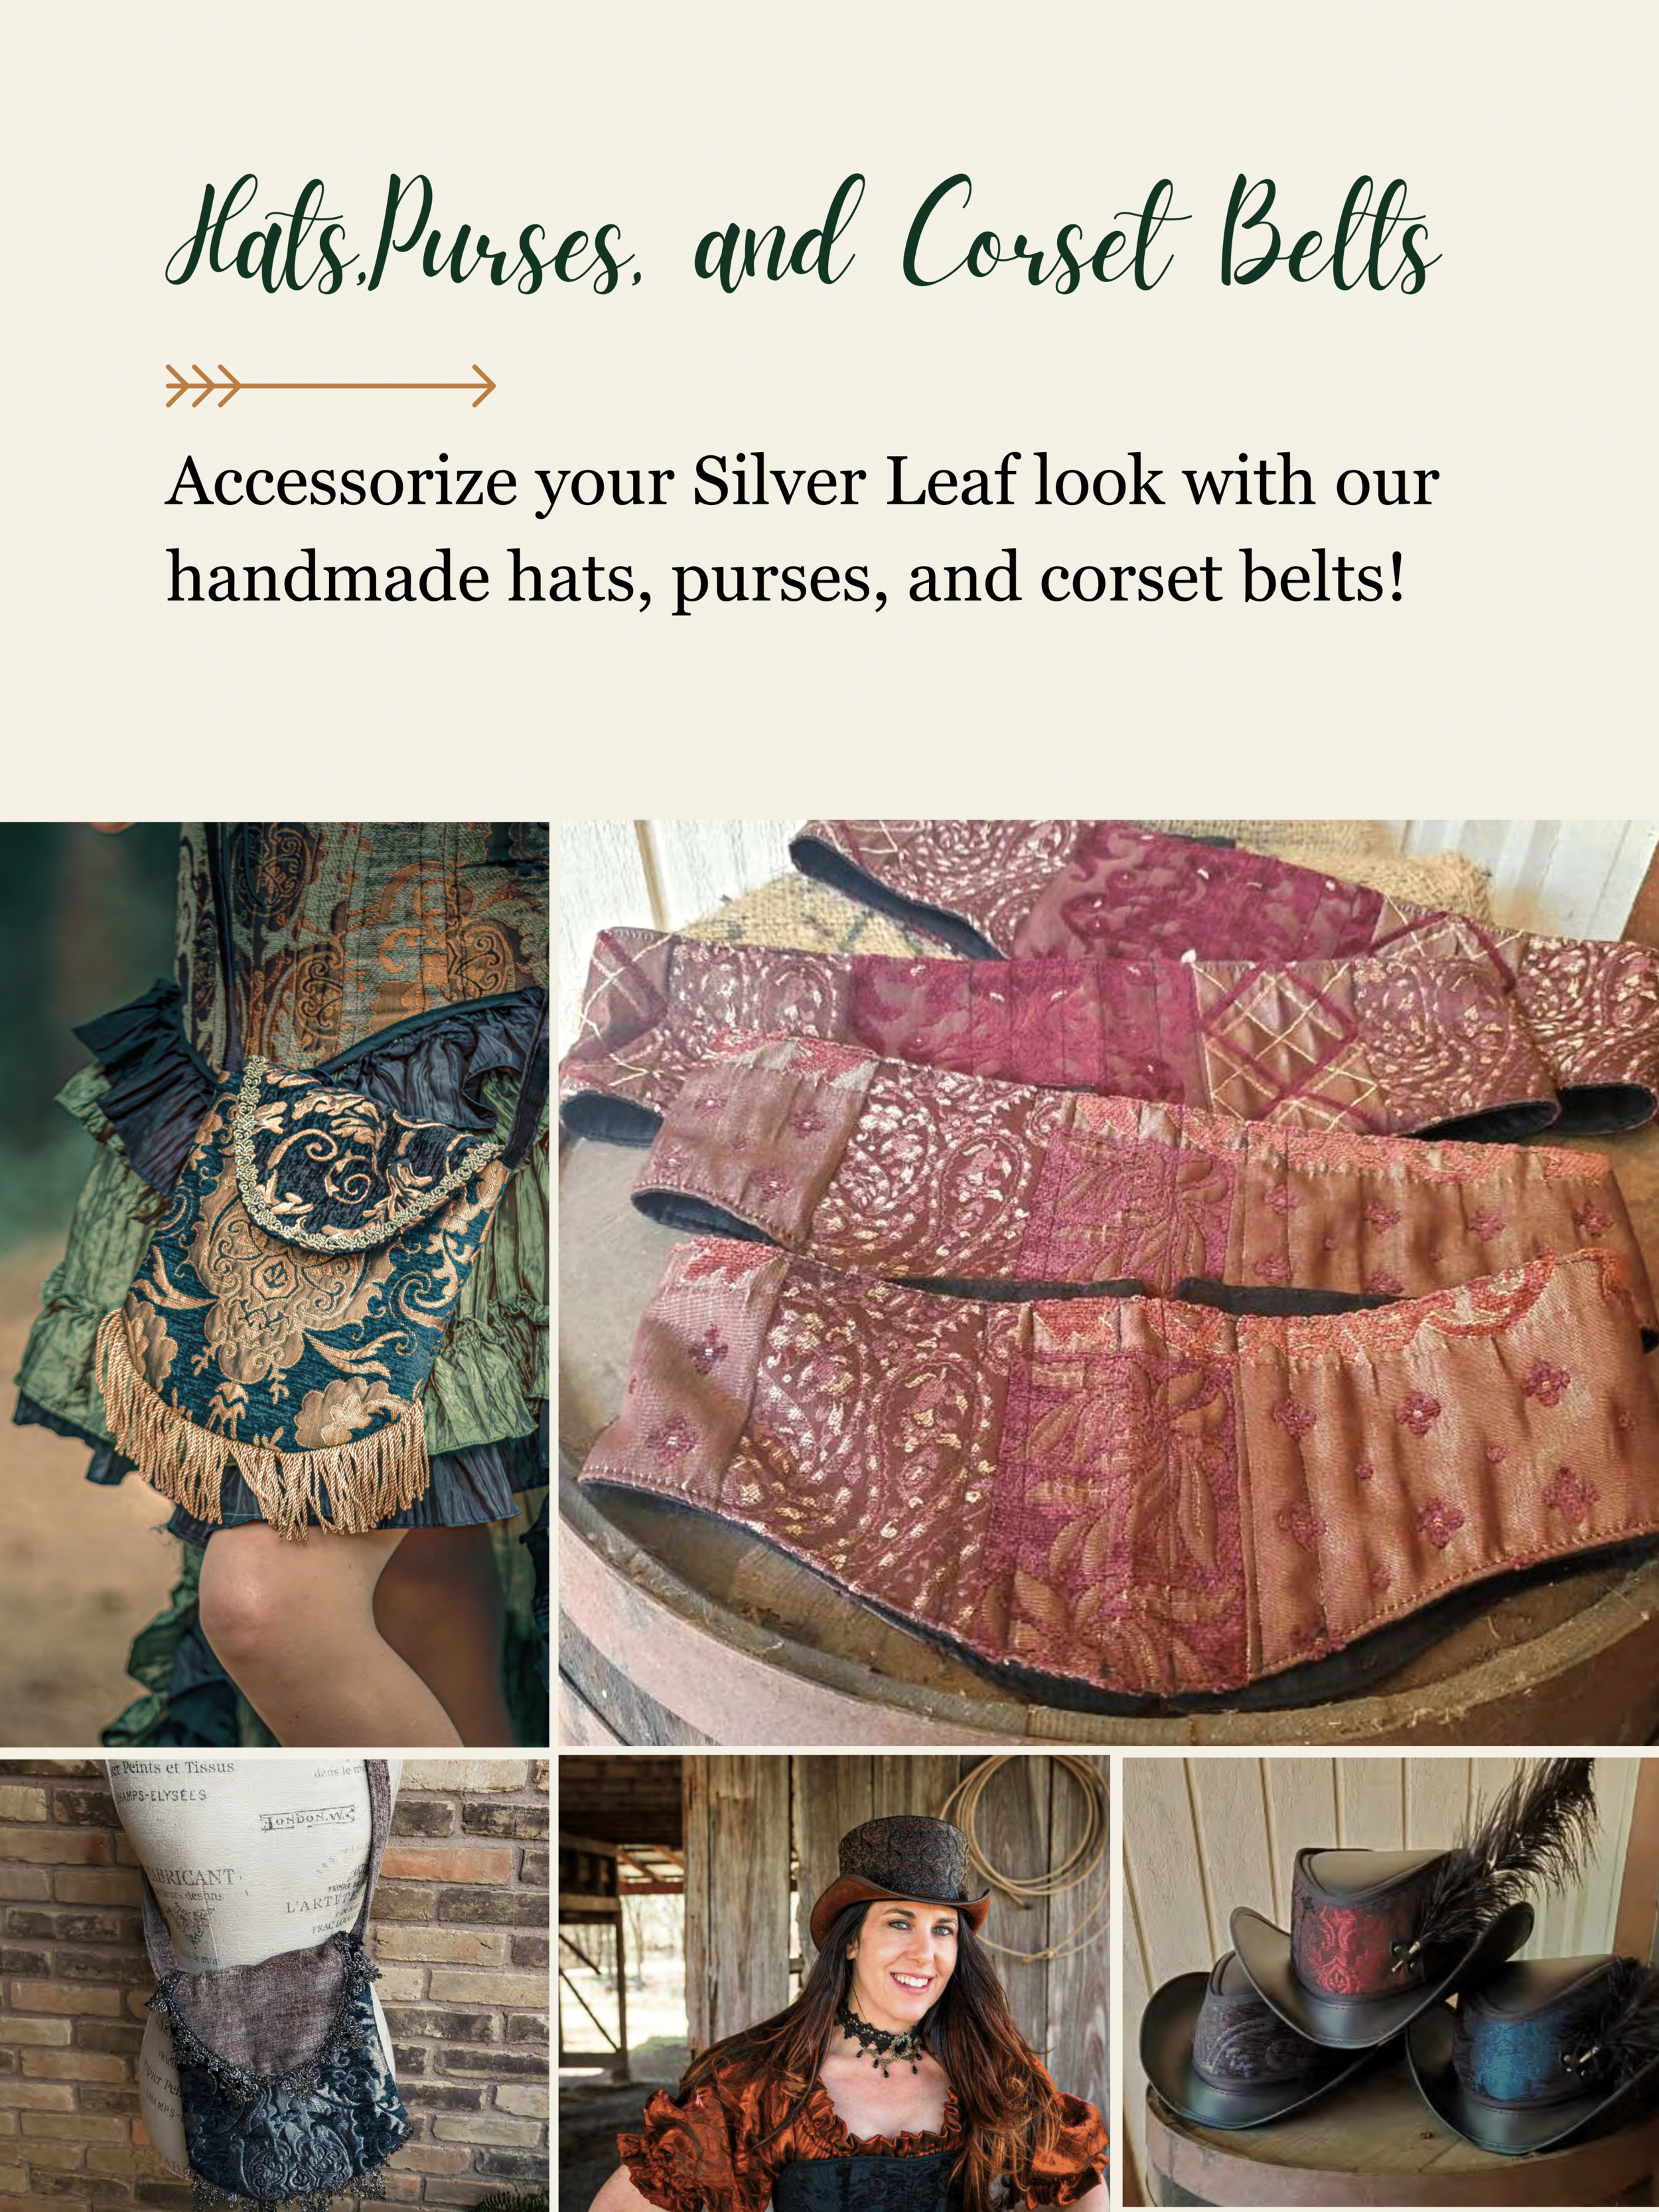 Silver Leaf Costumes 2021 Holiday Gift Guide - Reduced File Size-18.png